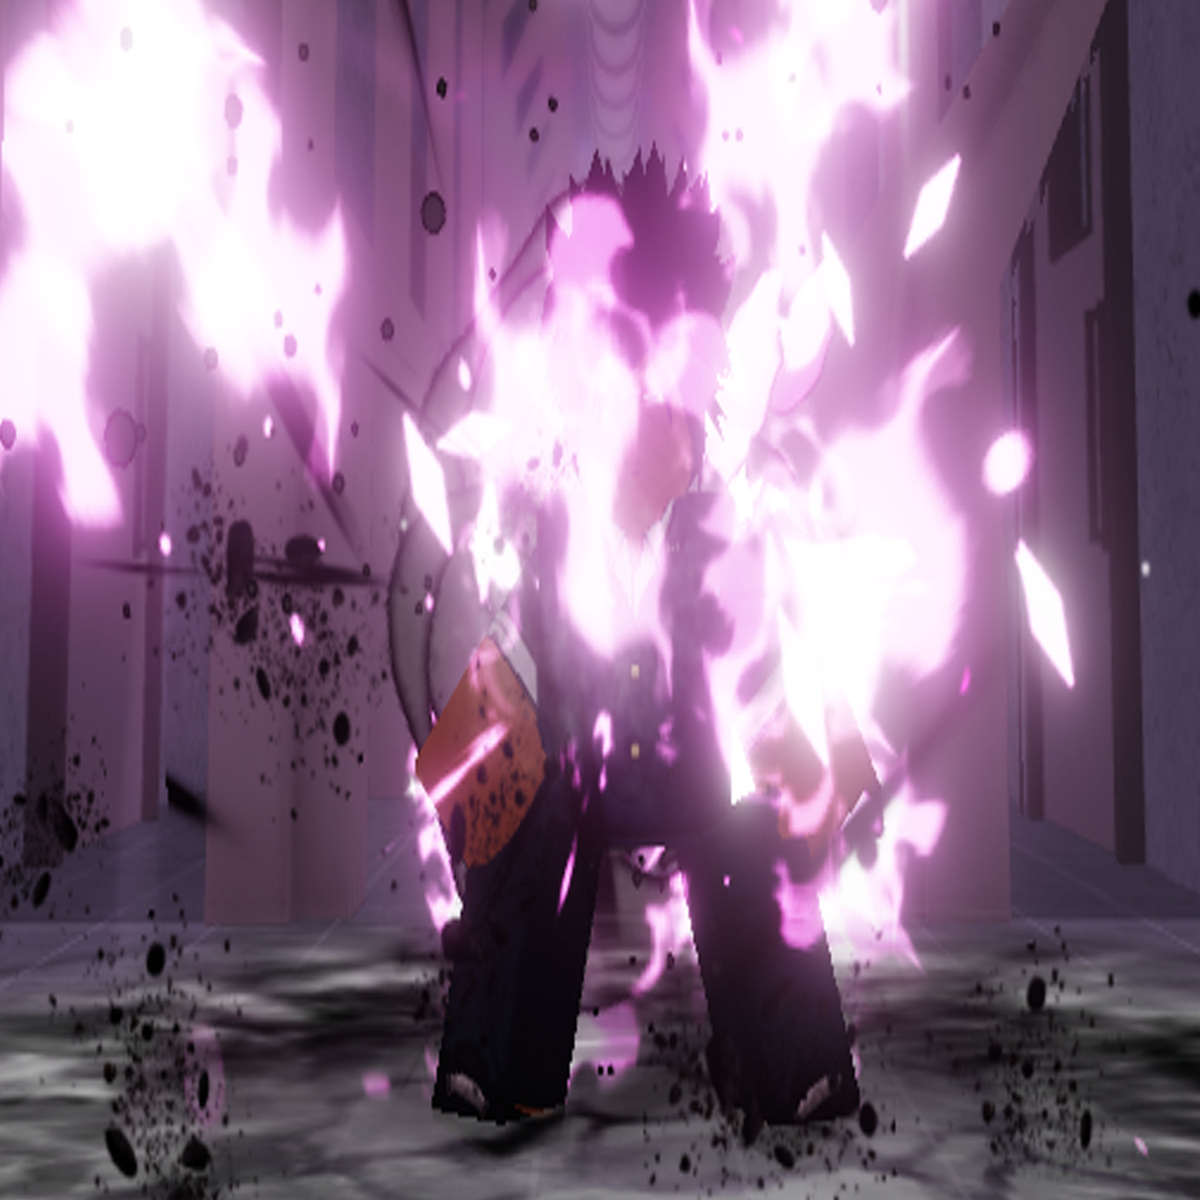 Fire Force Online codes for December 2023